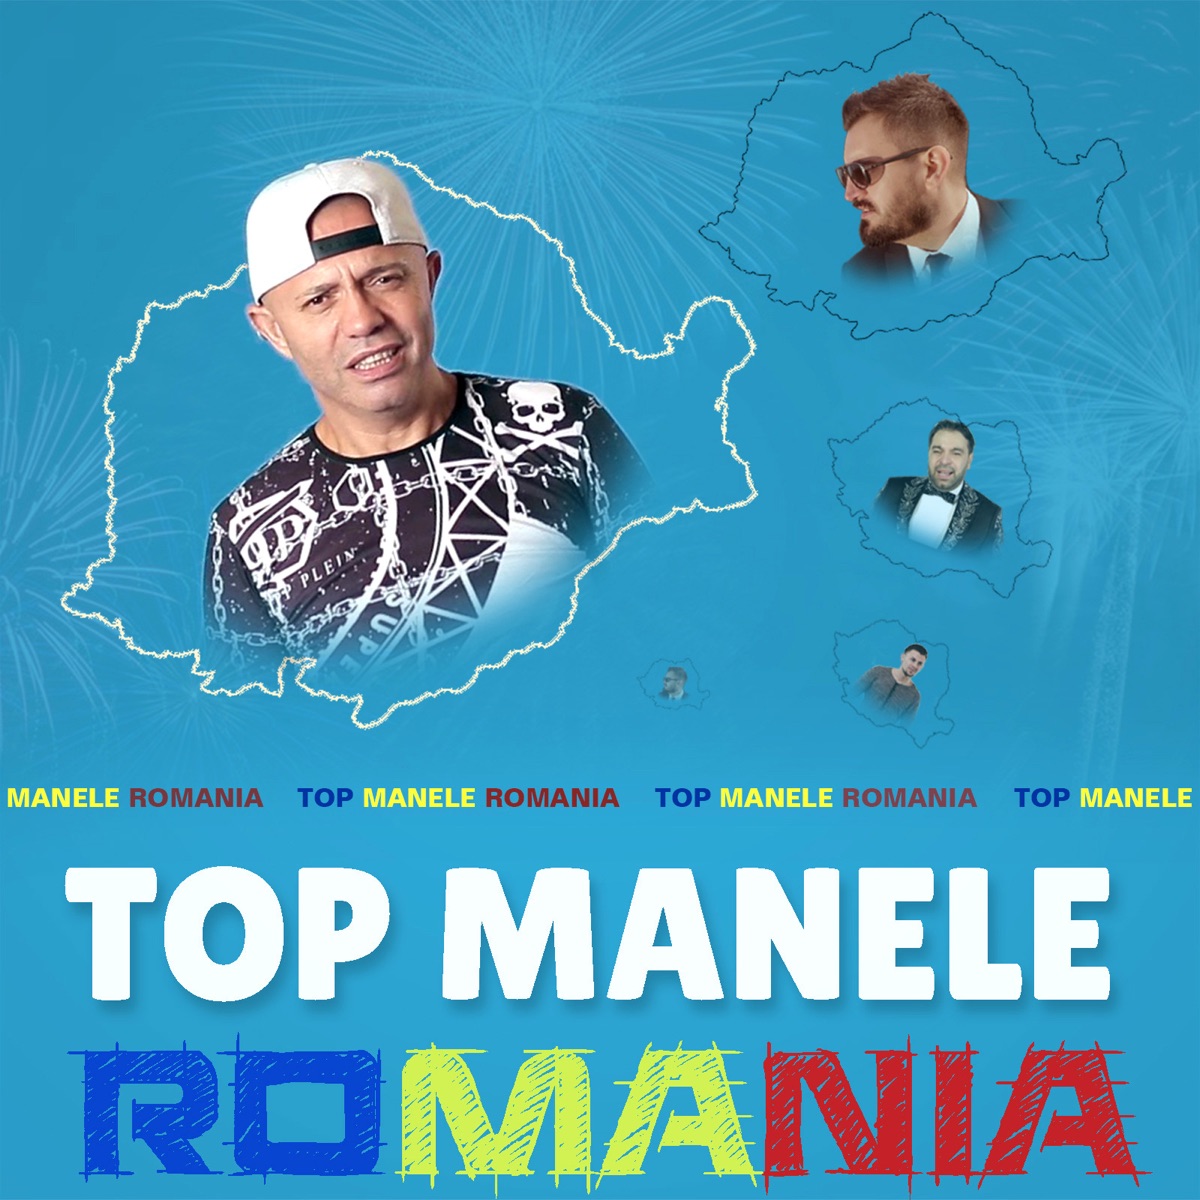 Top Manele Romania by Various Artists on Apple Music